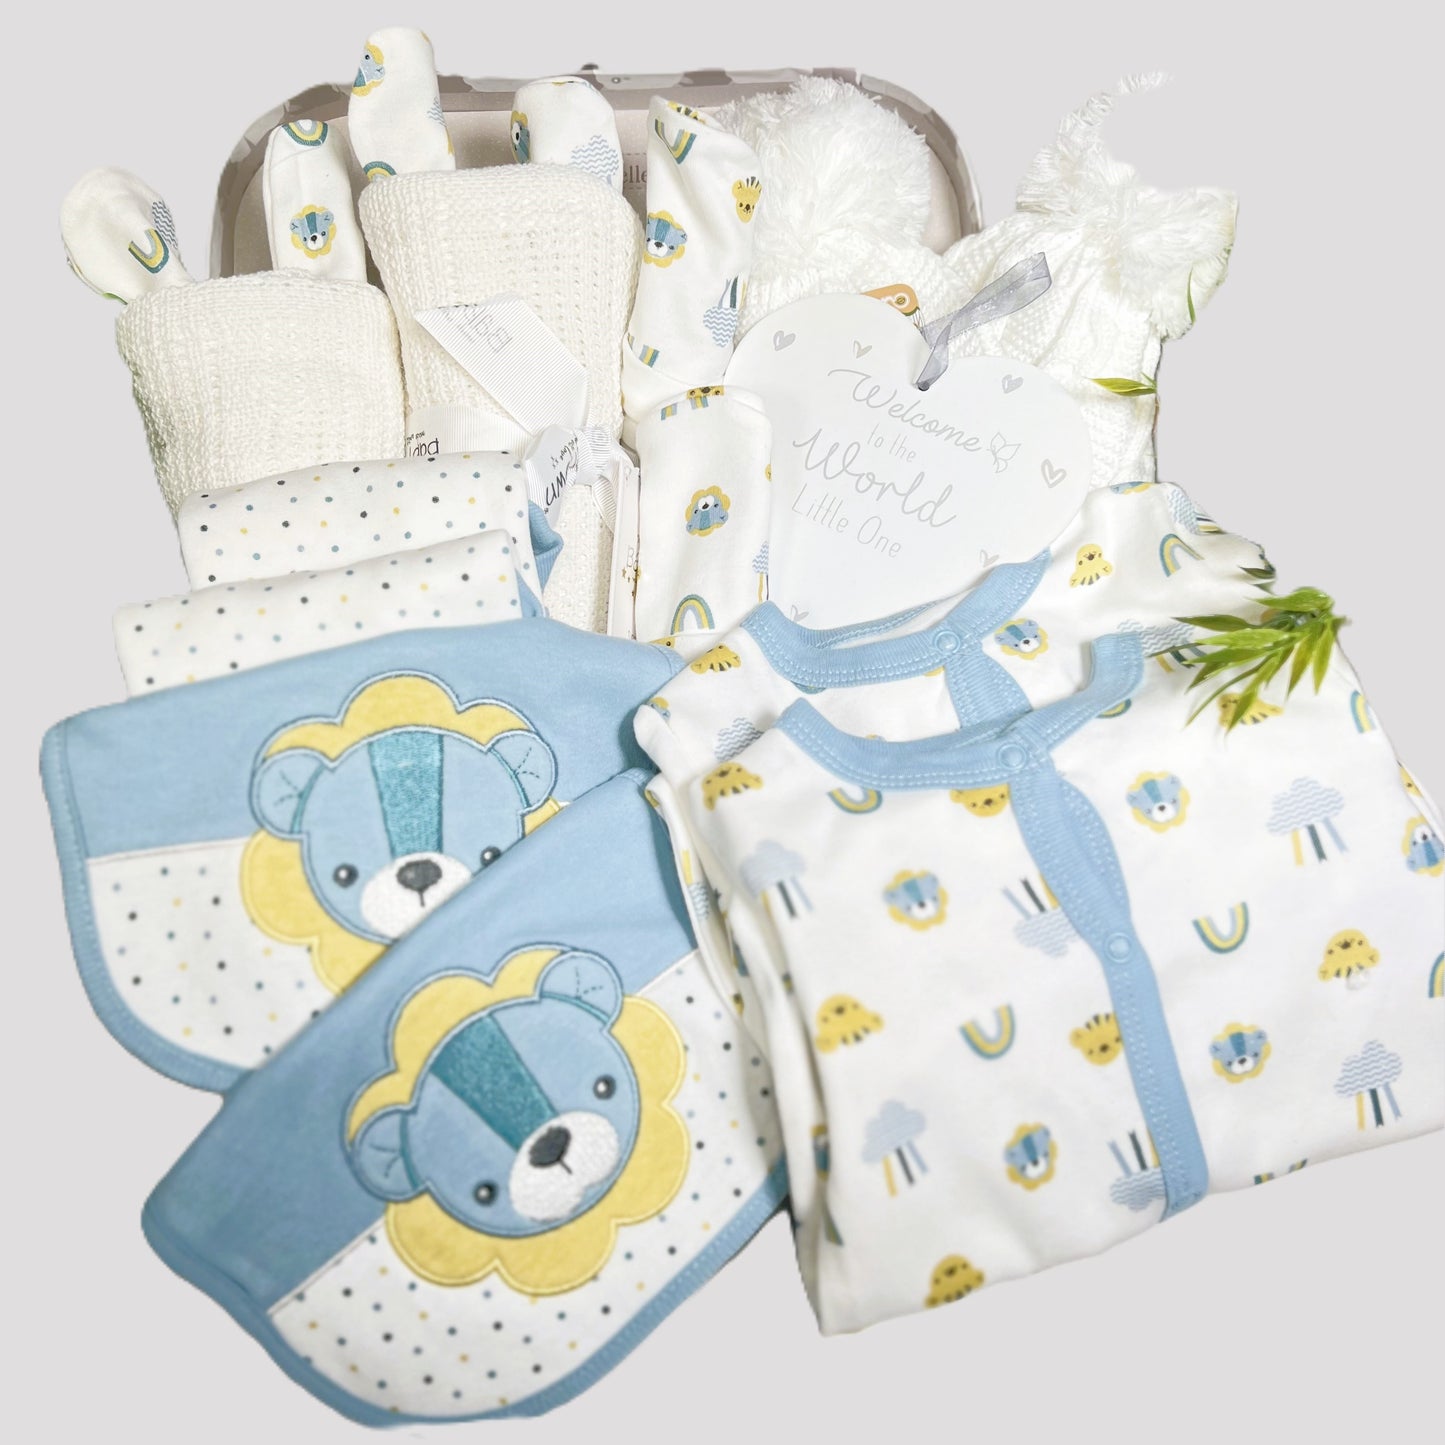 New twins baby boy hamper with lion sleeps suits in blue and yellow with matching baby bodysuits bibs, baby hats and scratch mits plus 2 white cotton cellular baby blankets, 2 white baby pompom hats and a white and grey nursery plaque.